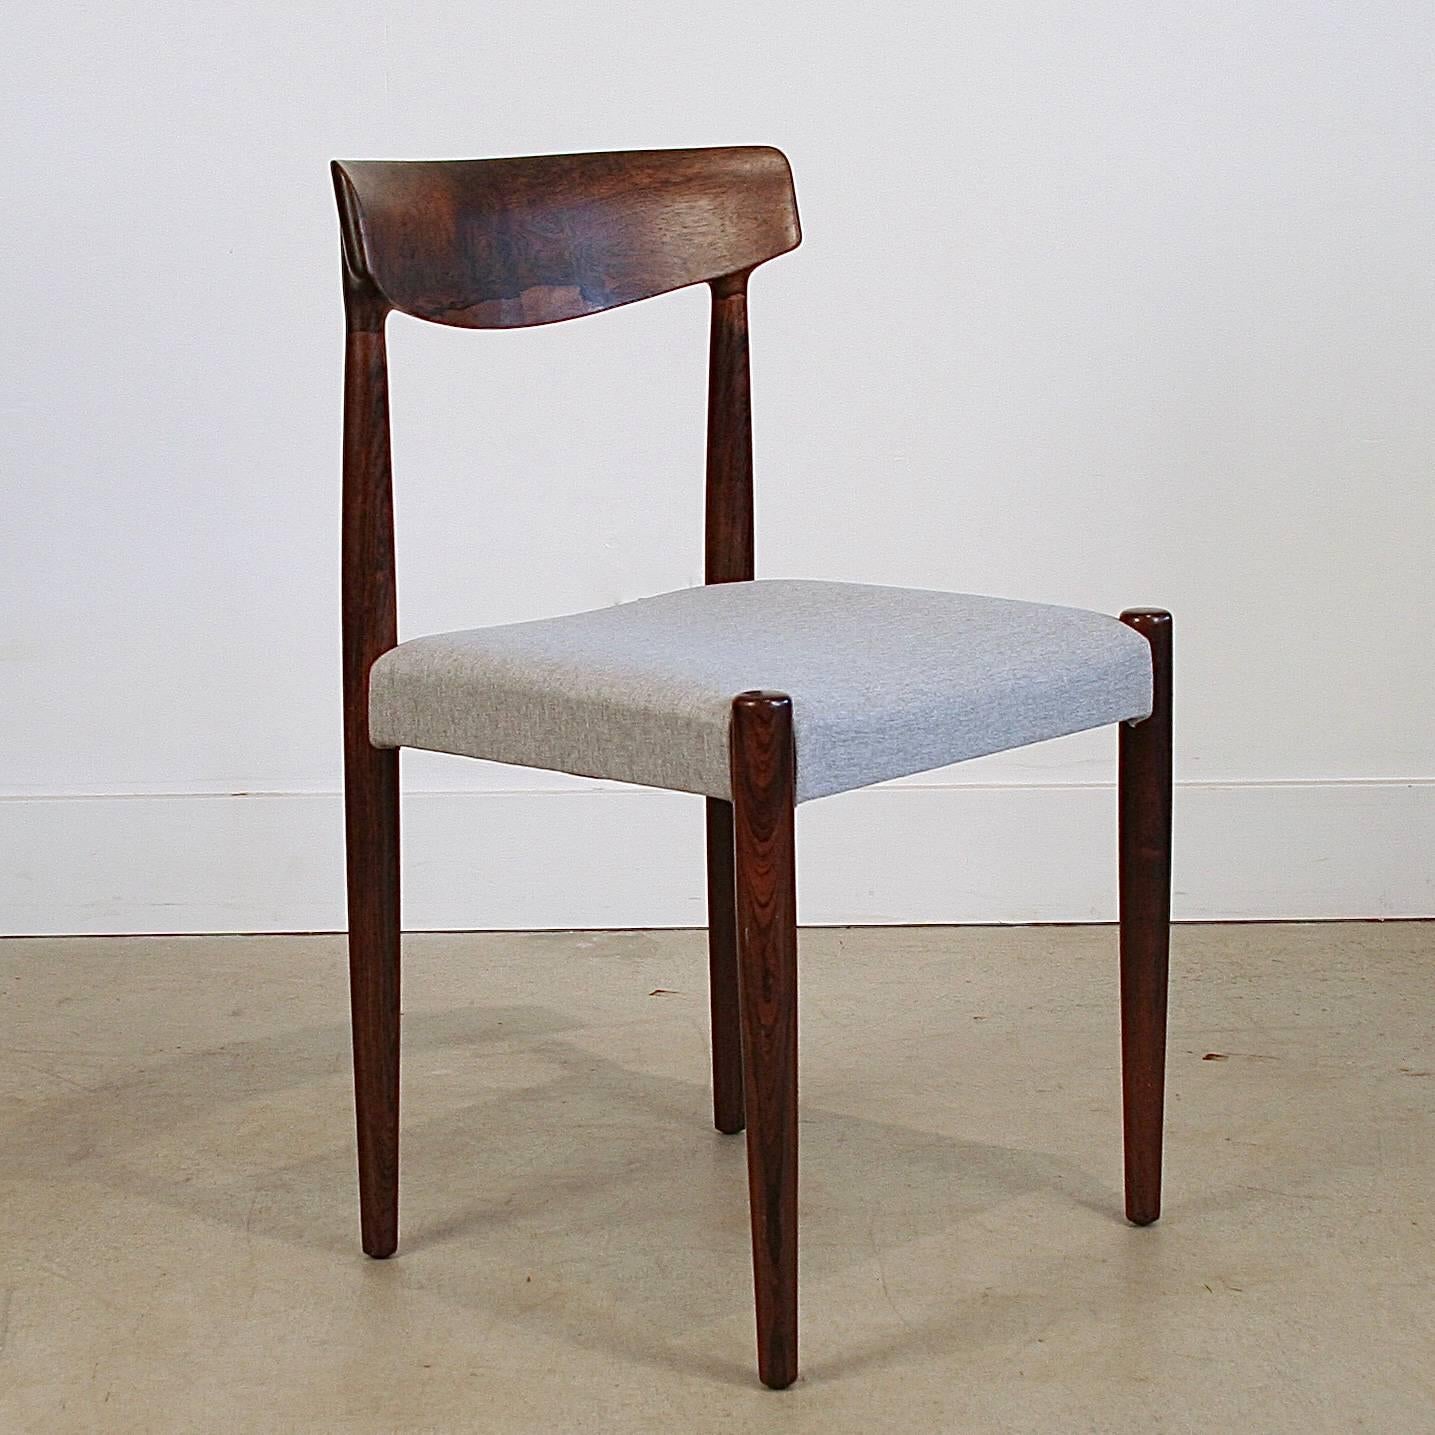 Exquisite vintage Danish rosewood dining chairs designed by Knud Faerch, Model 343. Newly reupholstered in a light grey fabric. Made in Denmark.